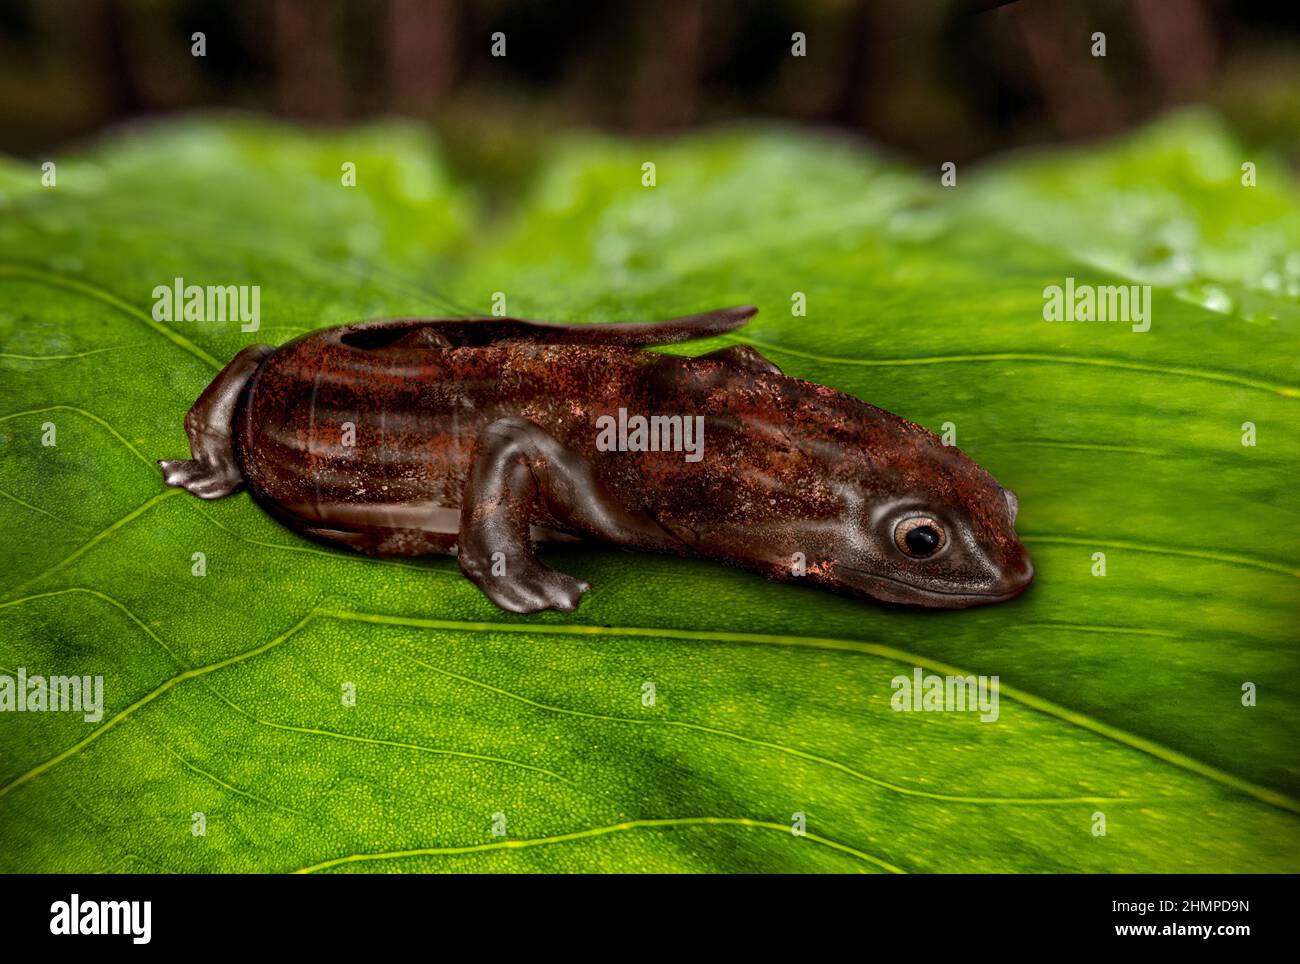 Giant palm salamander, Bolitoglossa dofleini. Salamander in the family Plethodontidae. Salamander on a leaf in a wet forest. Stock Photo